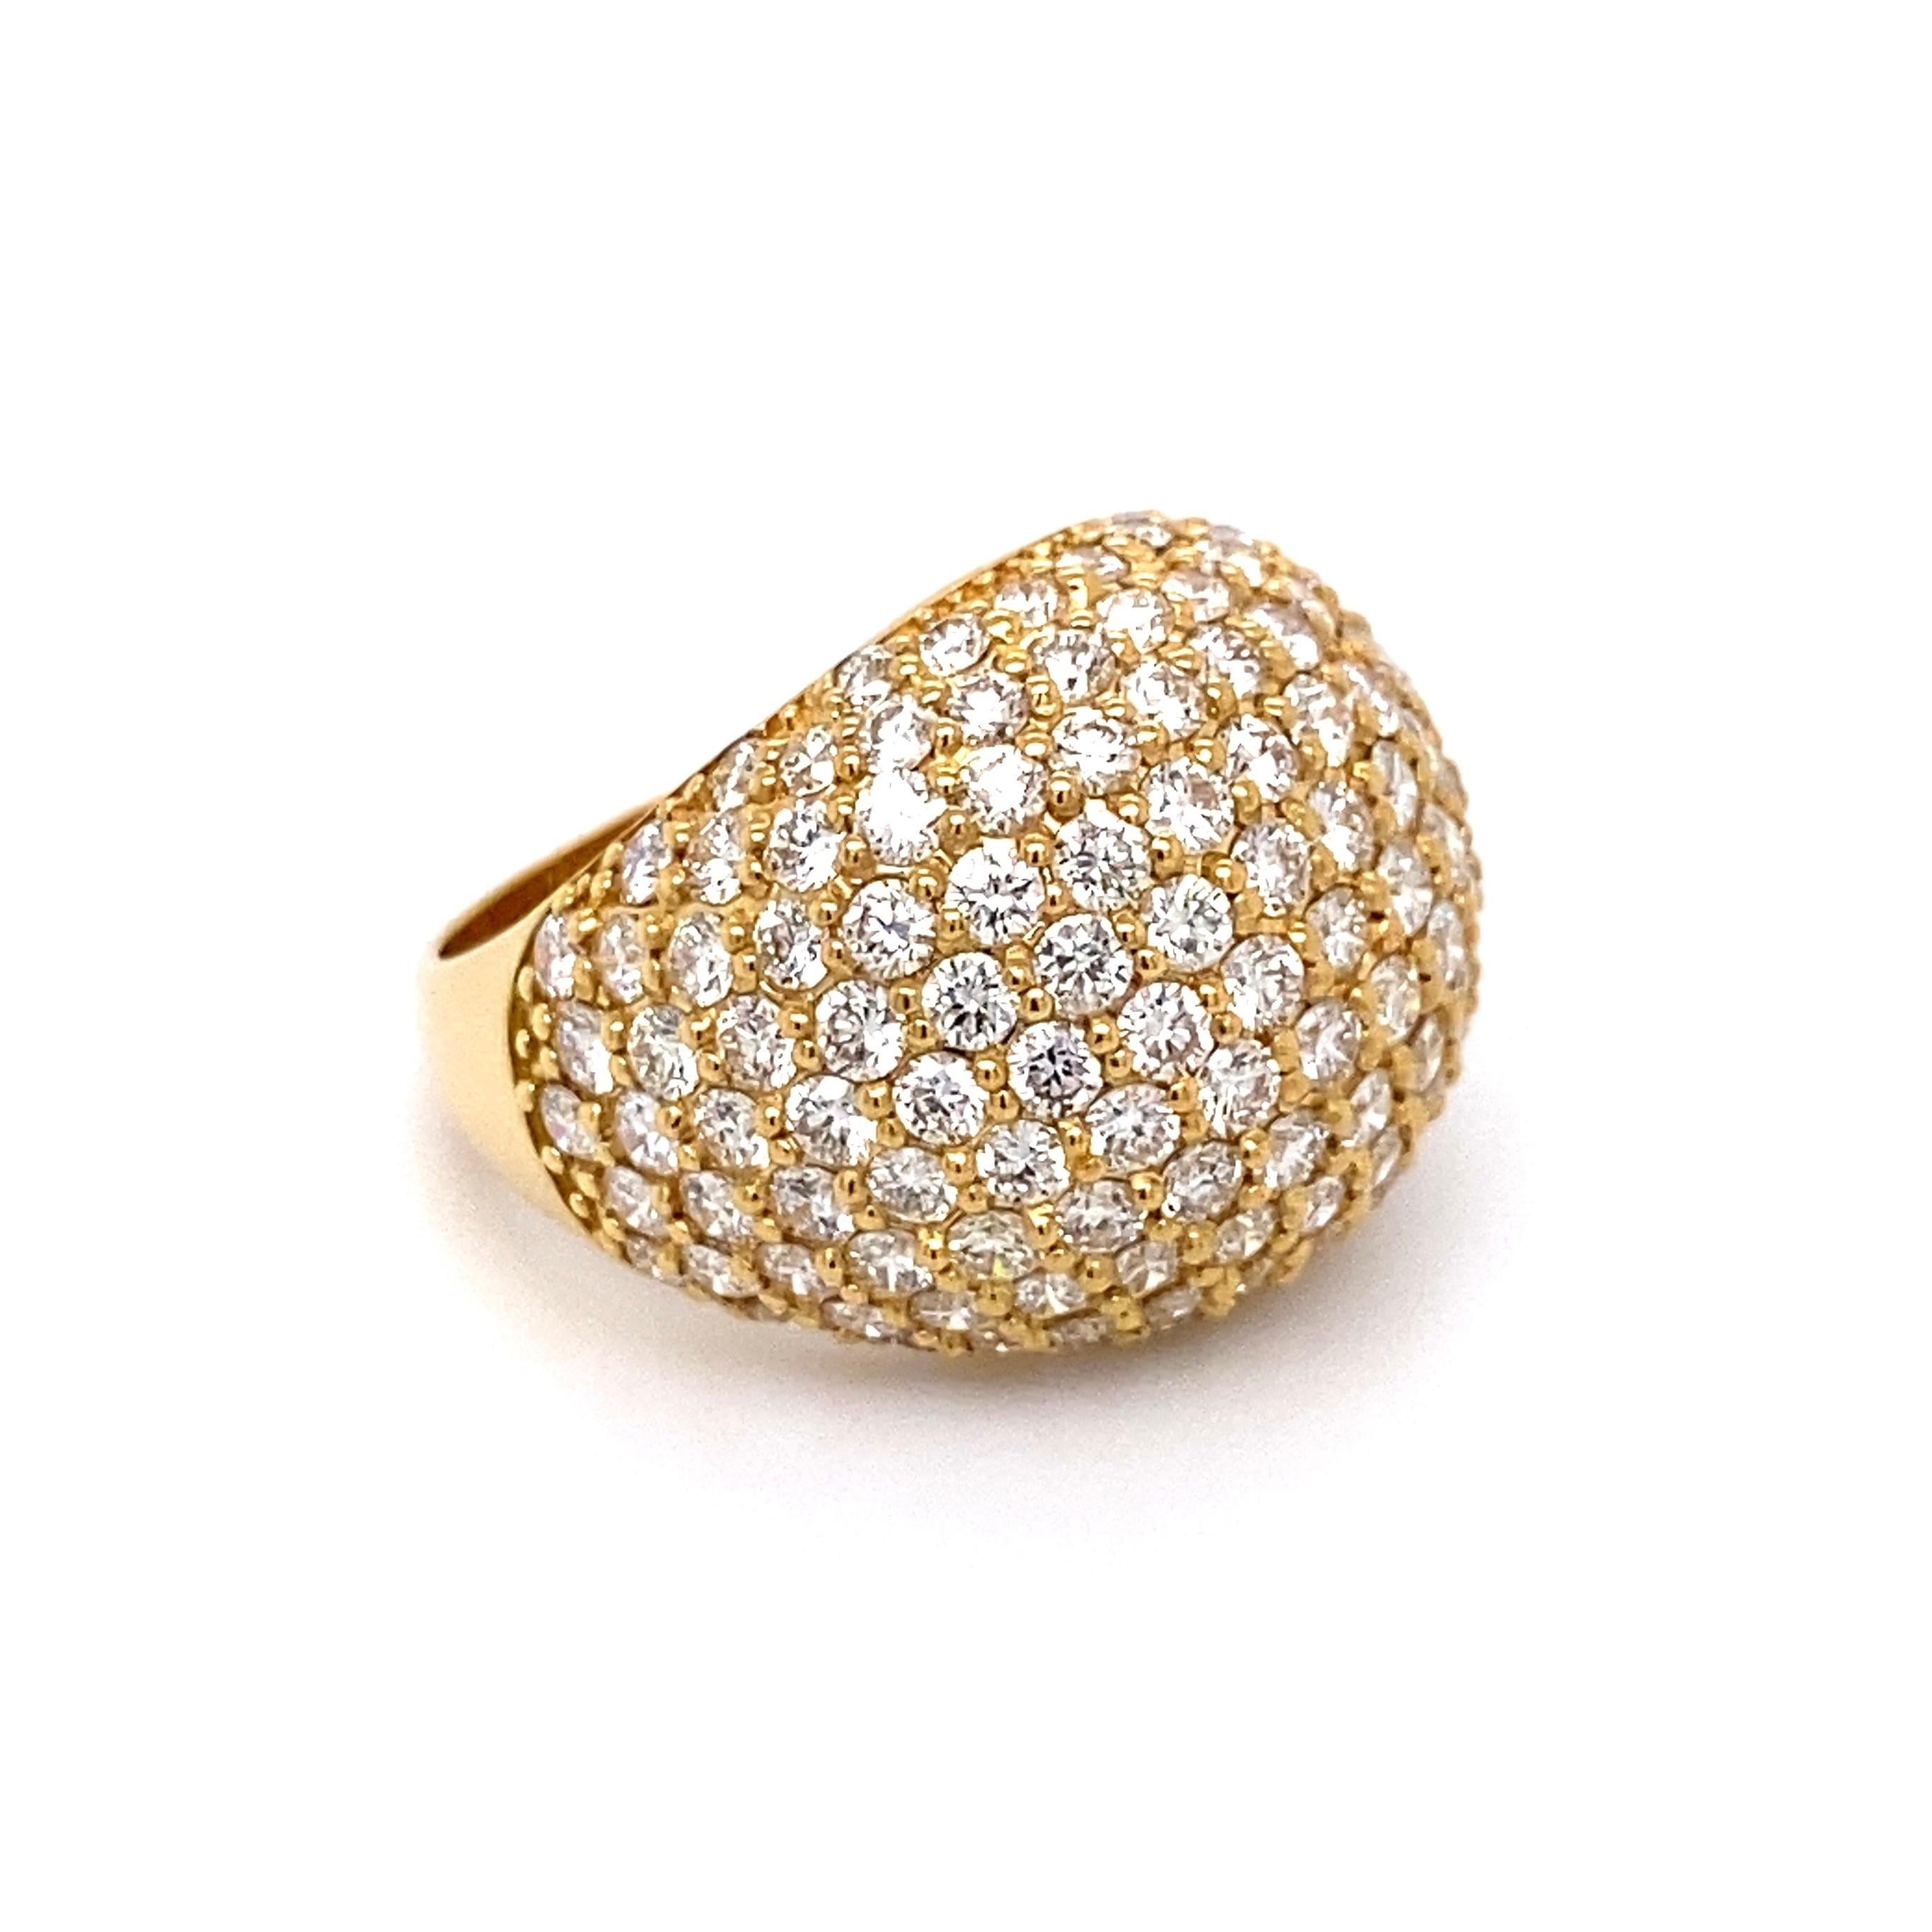 Simply Beautiful! Pave Diamond Dome Band Ring. Securely Hand set with VS/SI Diamonds, weighing approx. 5.07tcw. Hand crafted 18K Yellow Gold mounting. Measuring approx. 1.09” w x 0.91” w x 0.73” h. Ring size 7, we offer ring resizing. More Beautiful